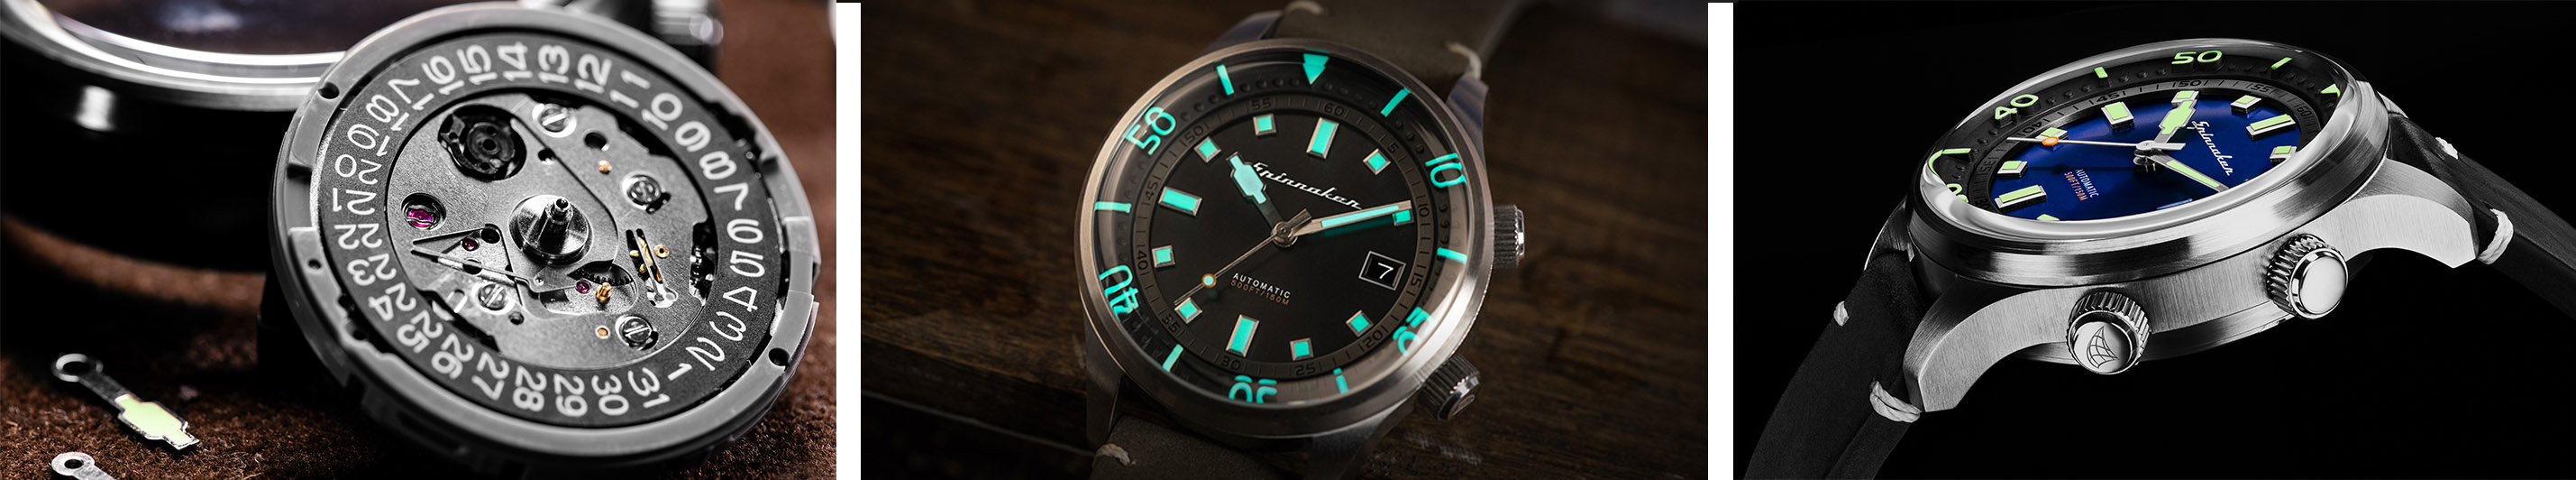 Spinnaker watches Bradner movement with date wheel, lume and case